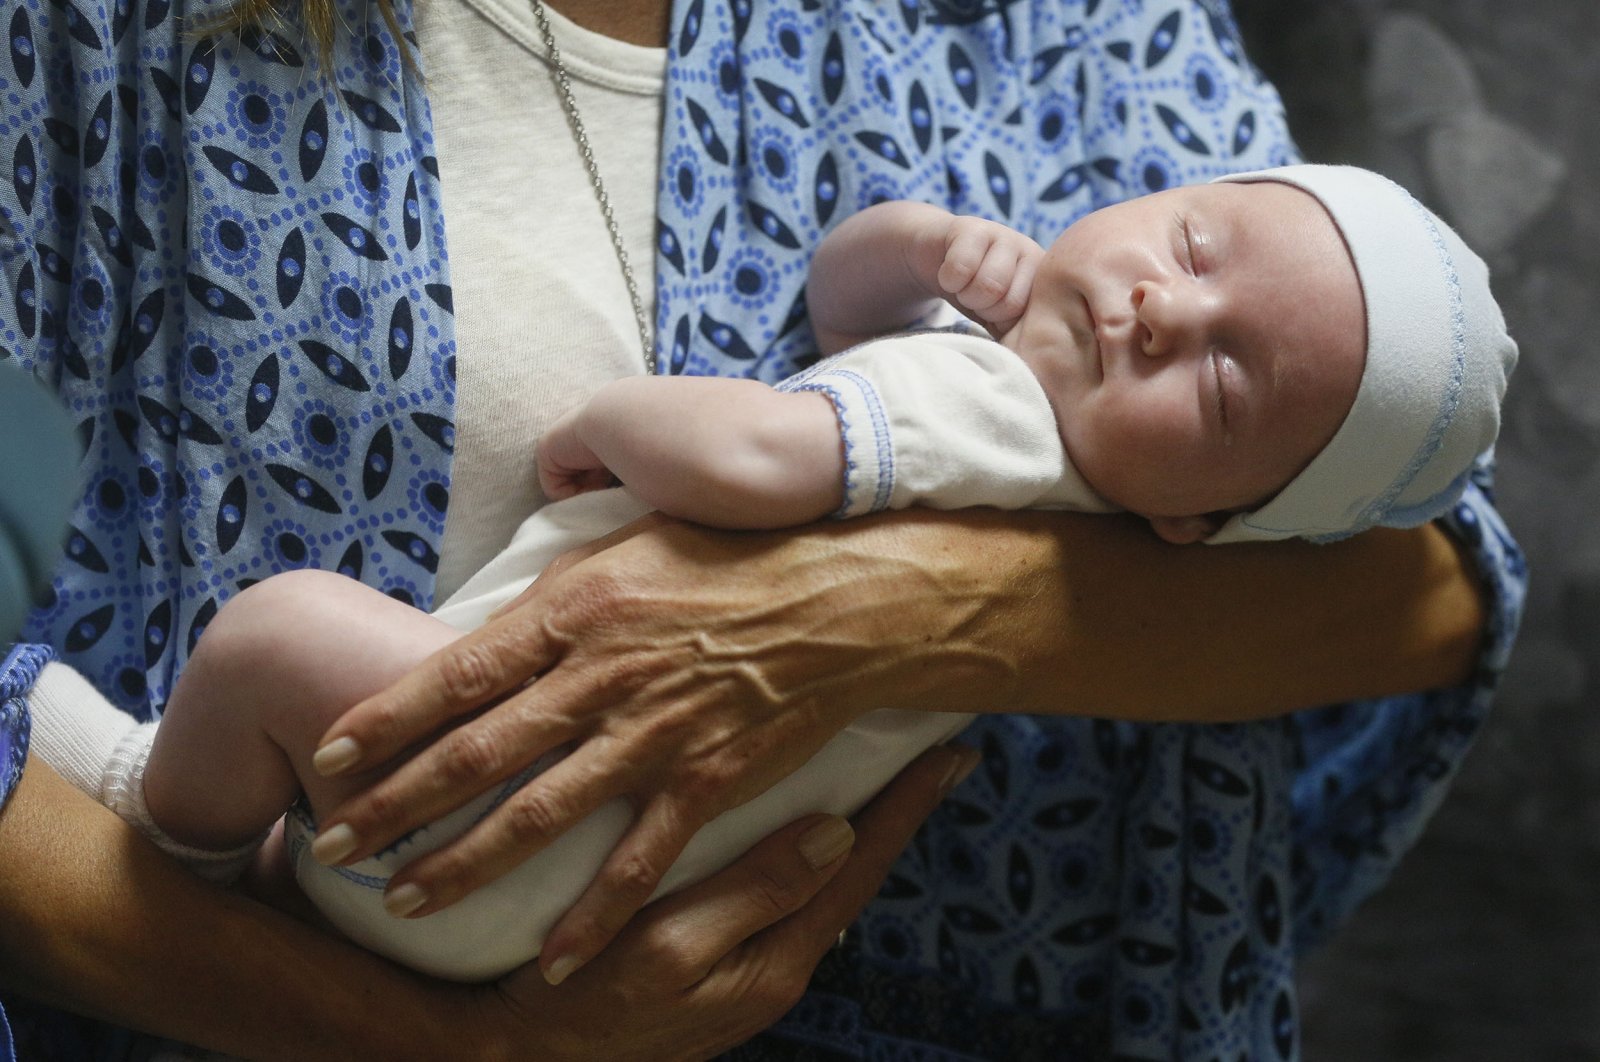 Andreo Diez, from Buenos Aires, Argentina, holds Ignacio, her baby born via a Ukrainian surrogate mother, after spending two weeks in quarantine, due to the coronavirus outbreak, in Kyiv, Ukraine, June 10, 2020. (AP Photo)